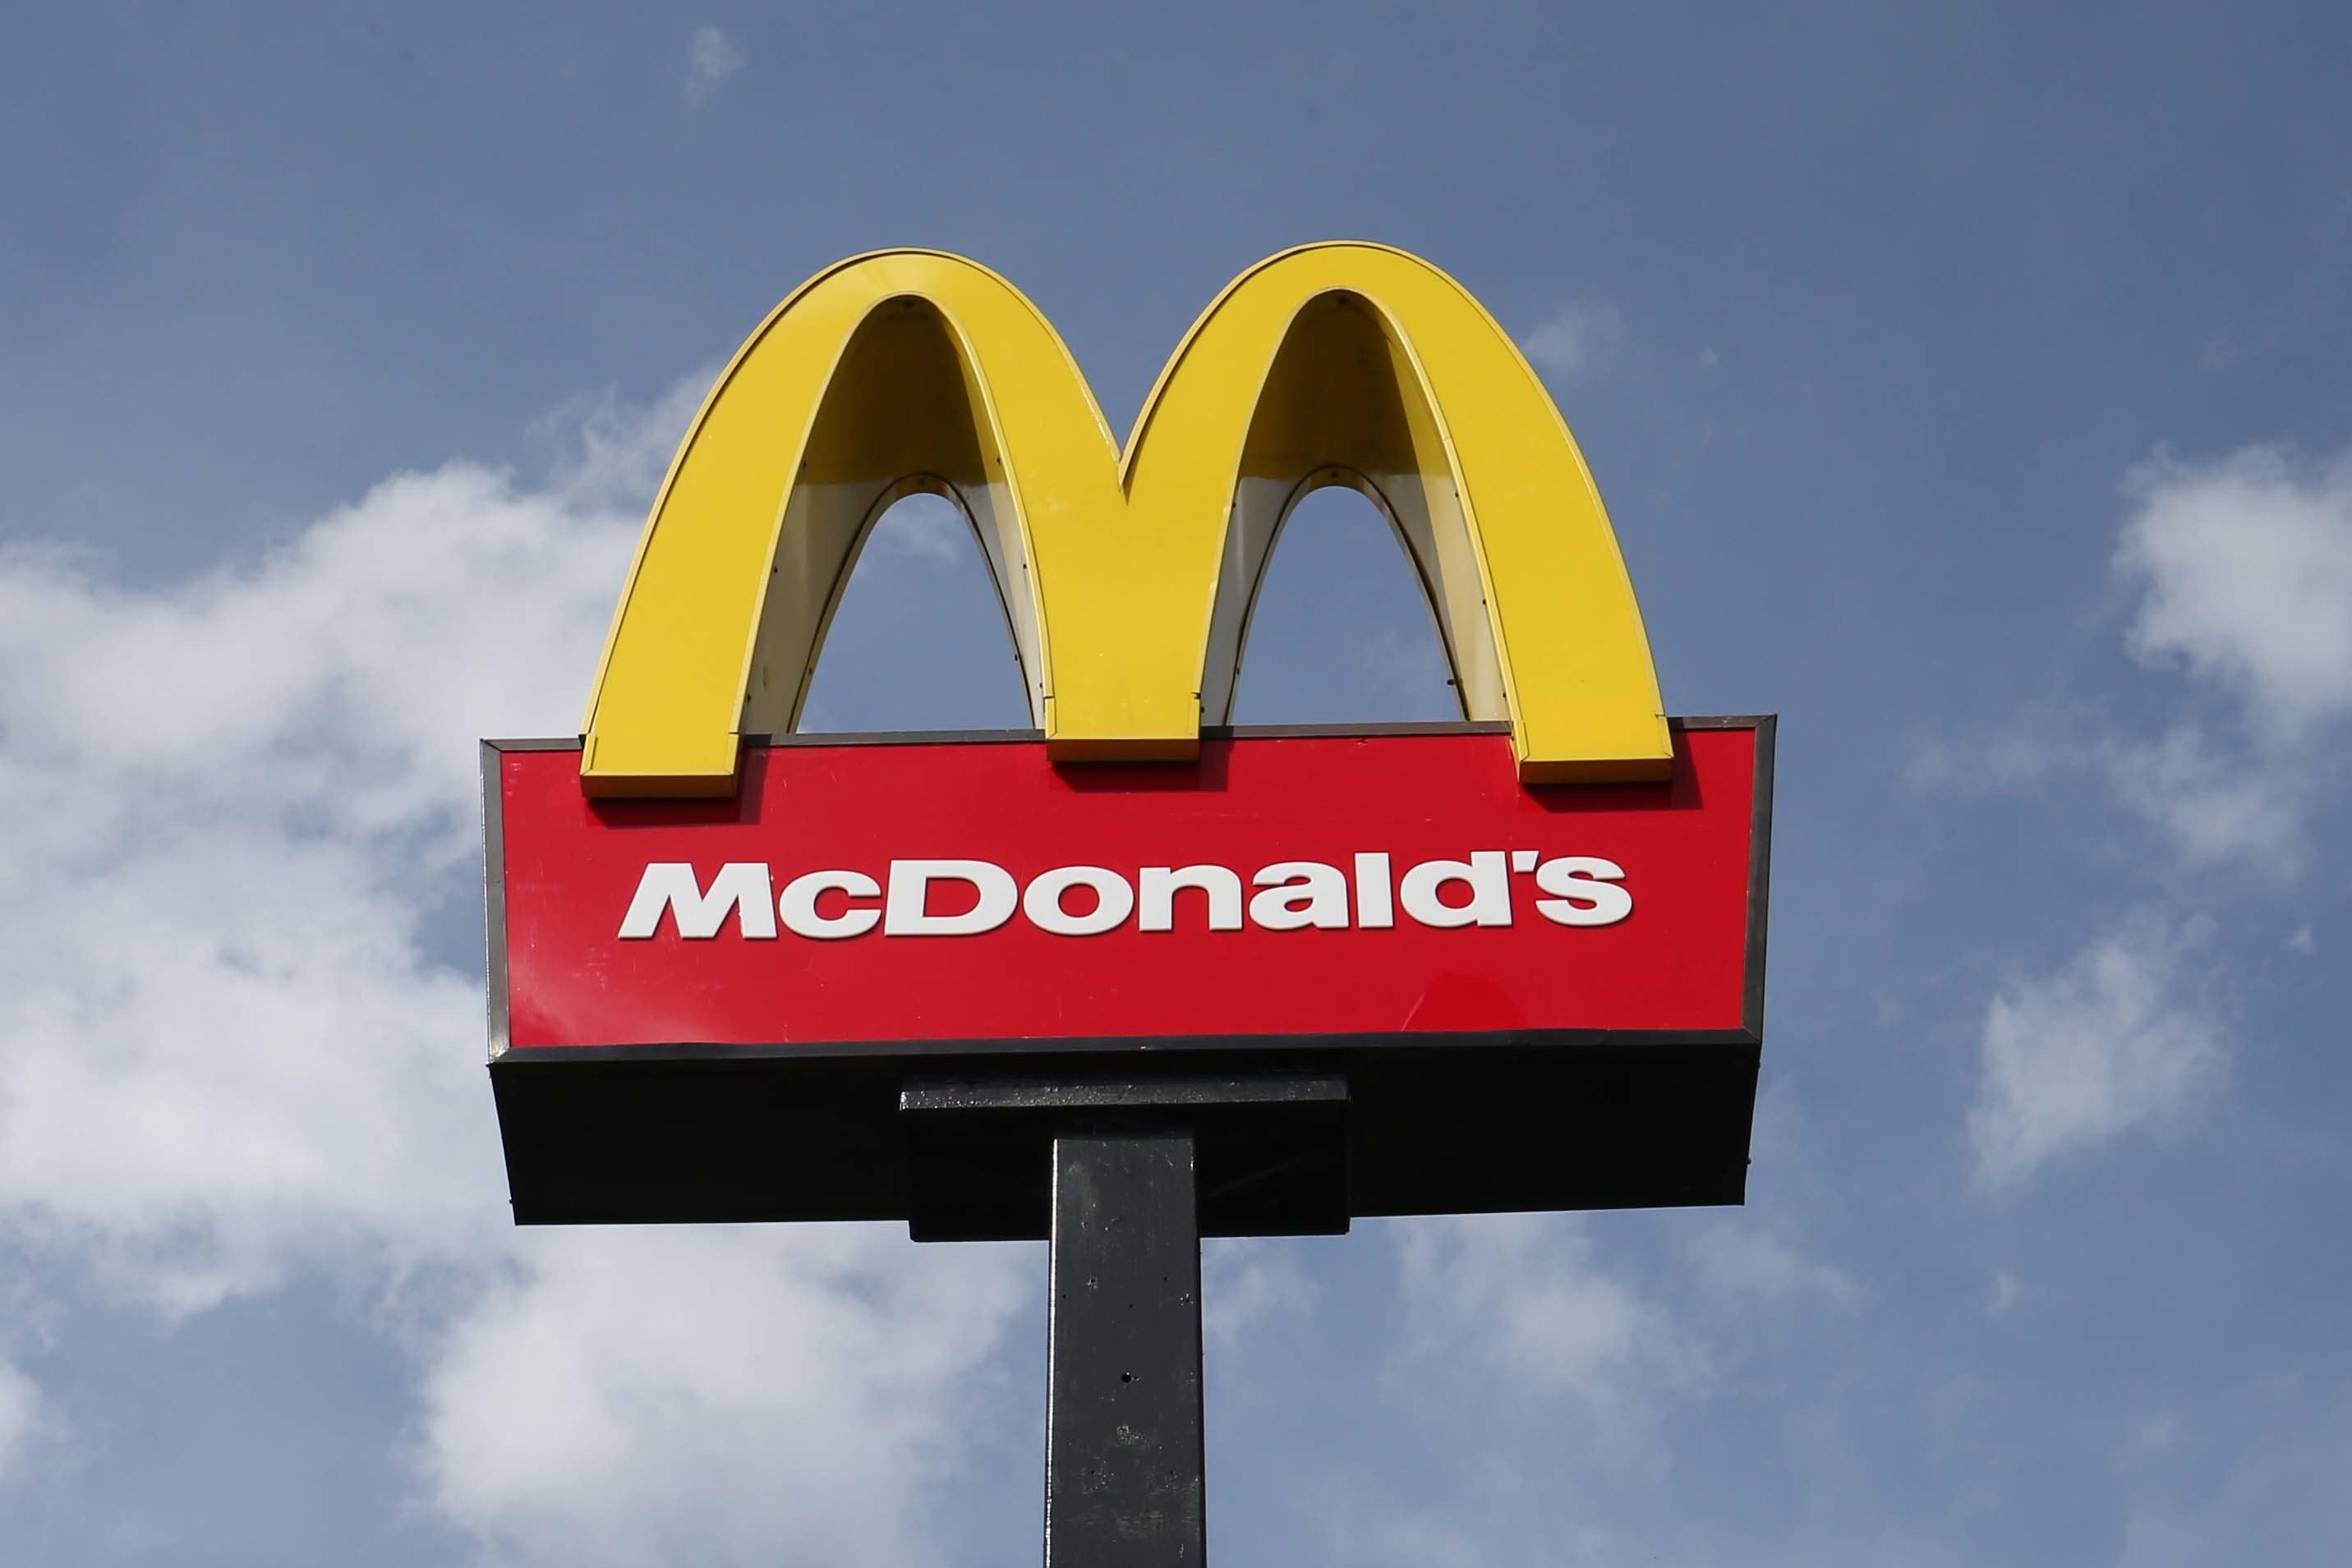 More than 100 past and present workers have said they were sexually harassed or assaulted or subjected to racism or bullying at McDonald’s